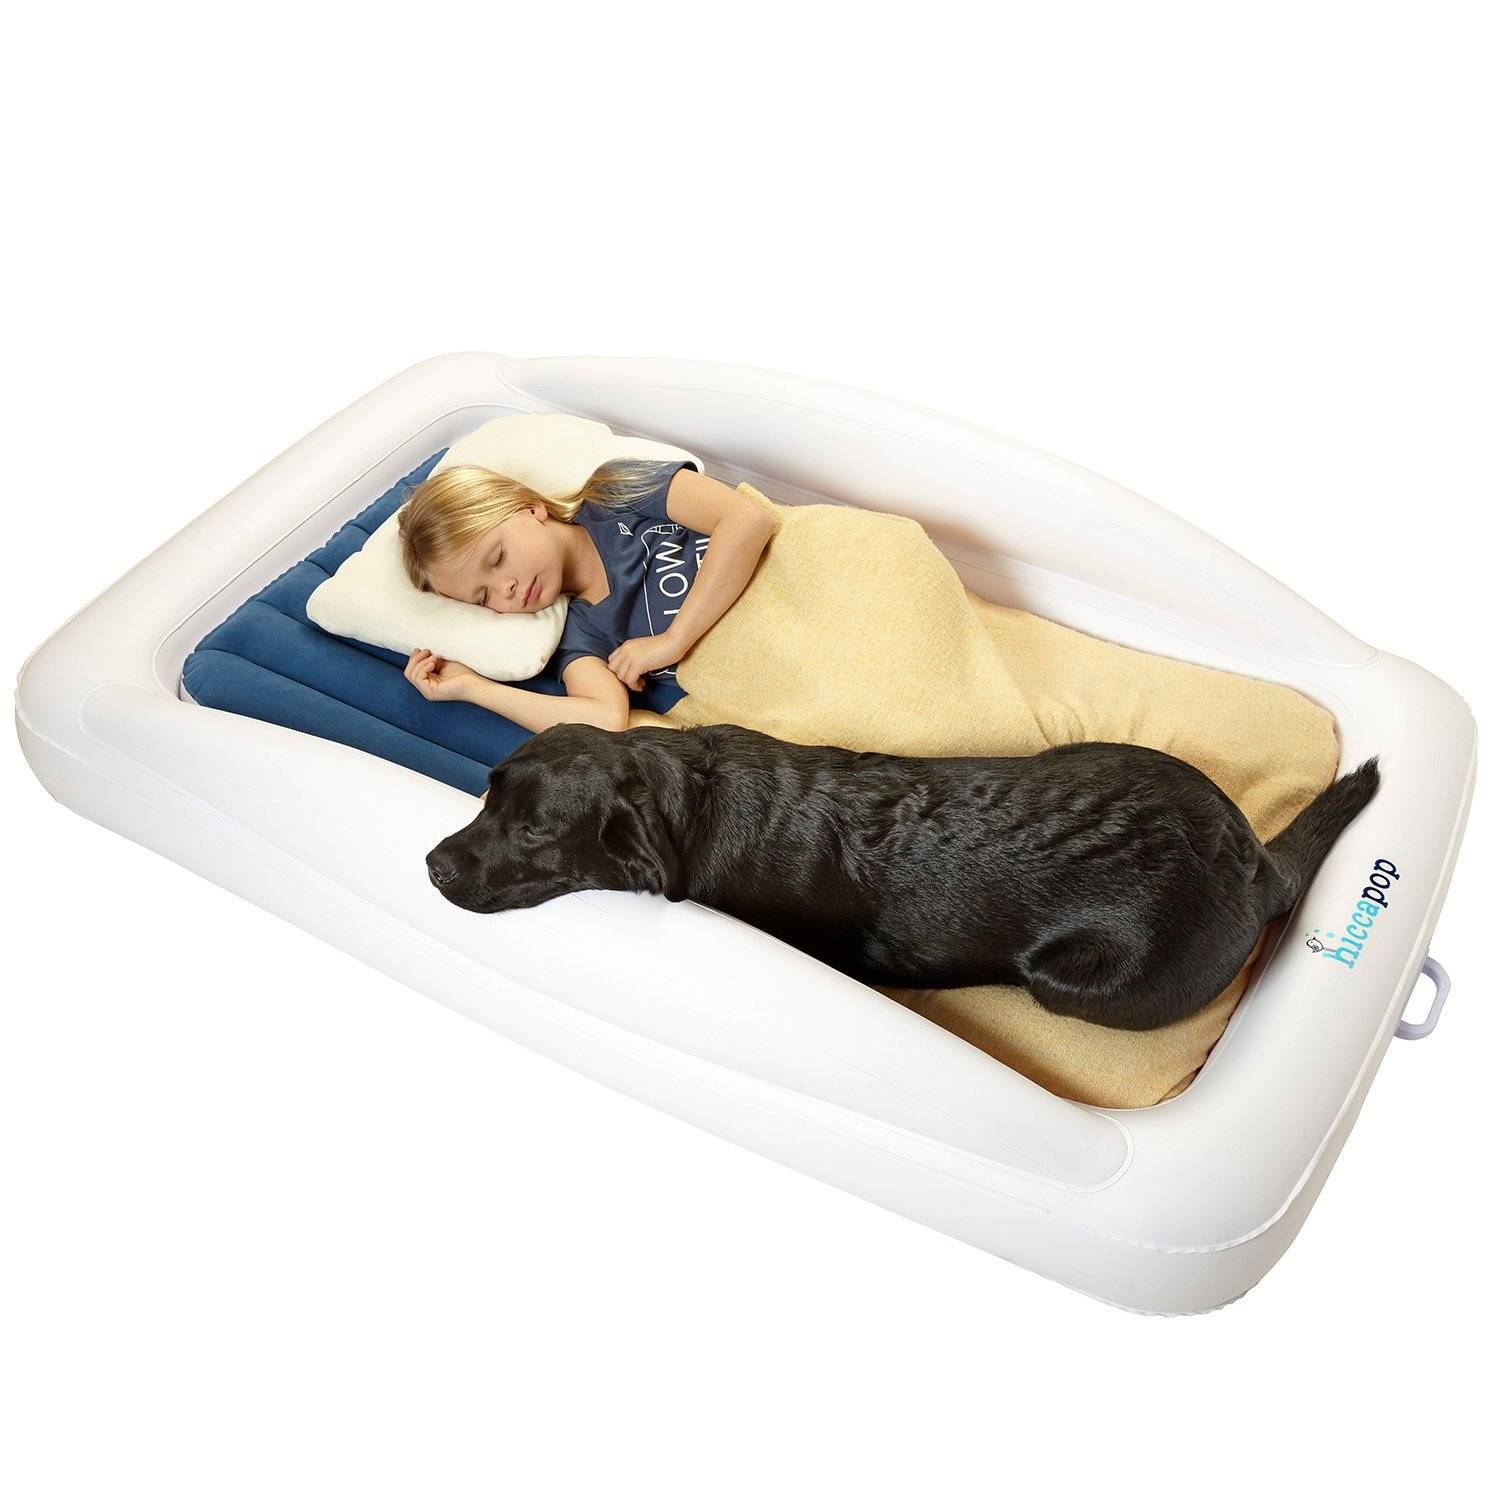 Inflatable Toddler Travel Air Bed with Safety Bumpers